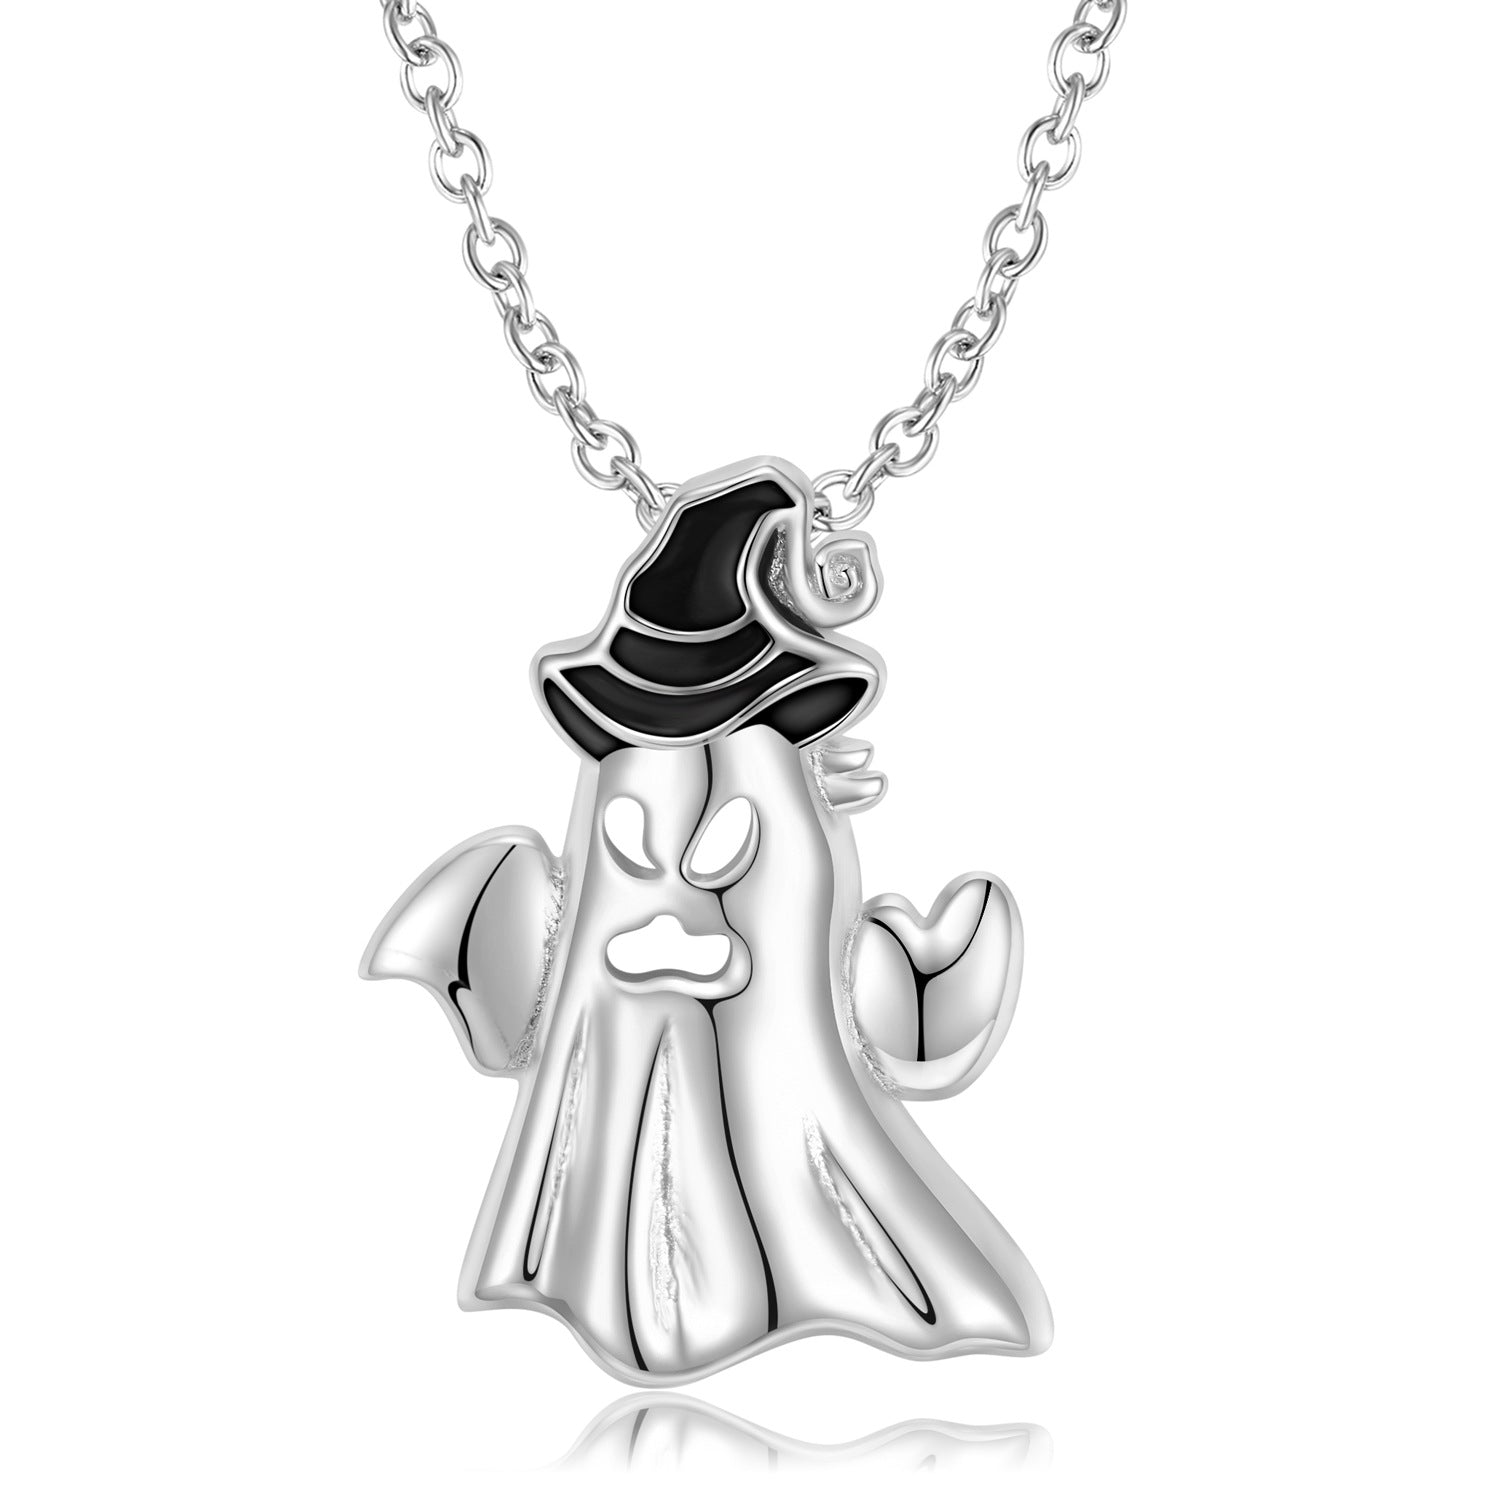 Boltiesd™ Scare Ghost Necklace in Sterling Silver S925 for Halloween - Boltiesd™